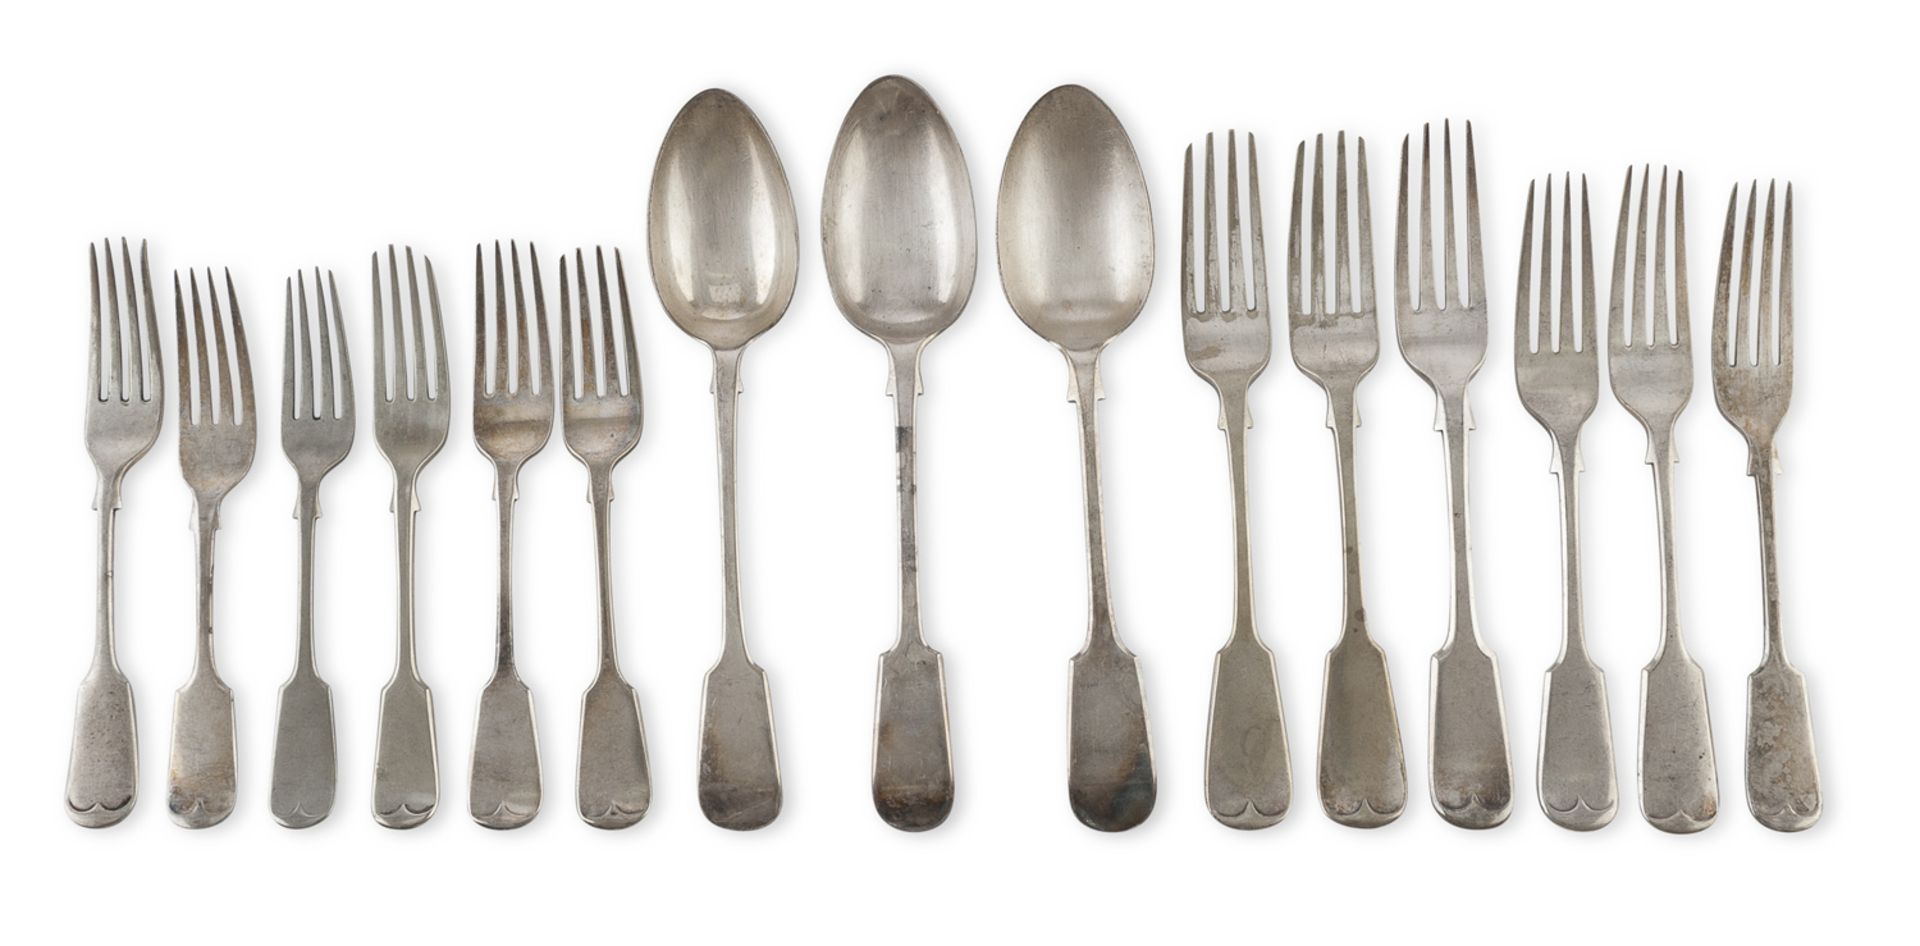 LOT OF MISCELLANEOUS CUTLERY UNITED KINGDOM 19TH CENTURY